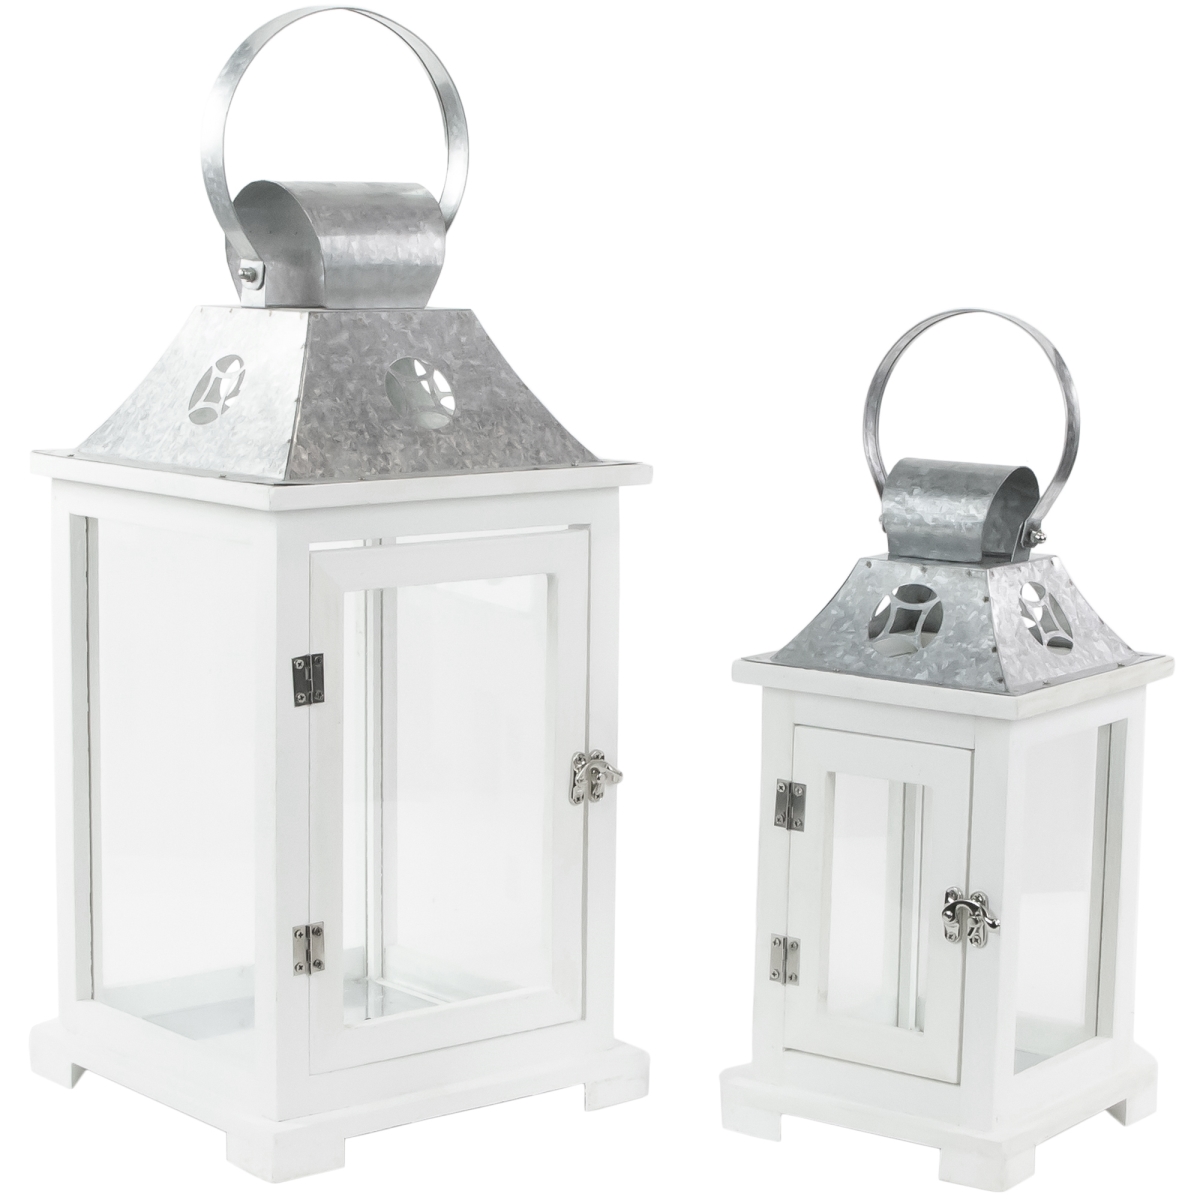 Picture of Northlight 35132882 19.5 in. White Wooden Candle Lanterns with Galvanized Metal Tops, Set of 2